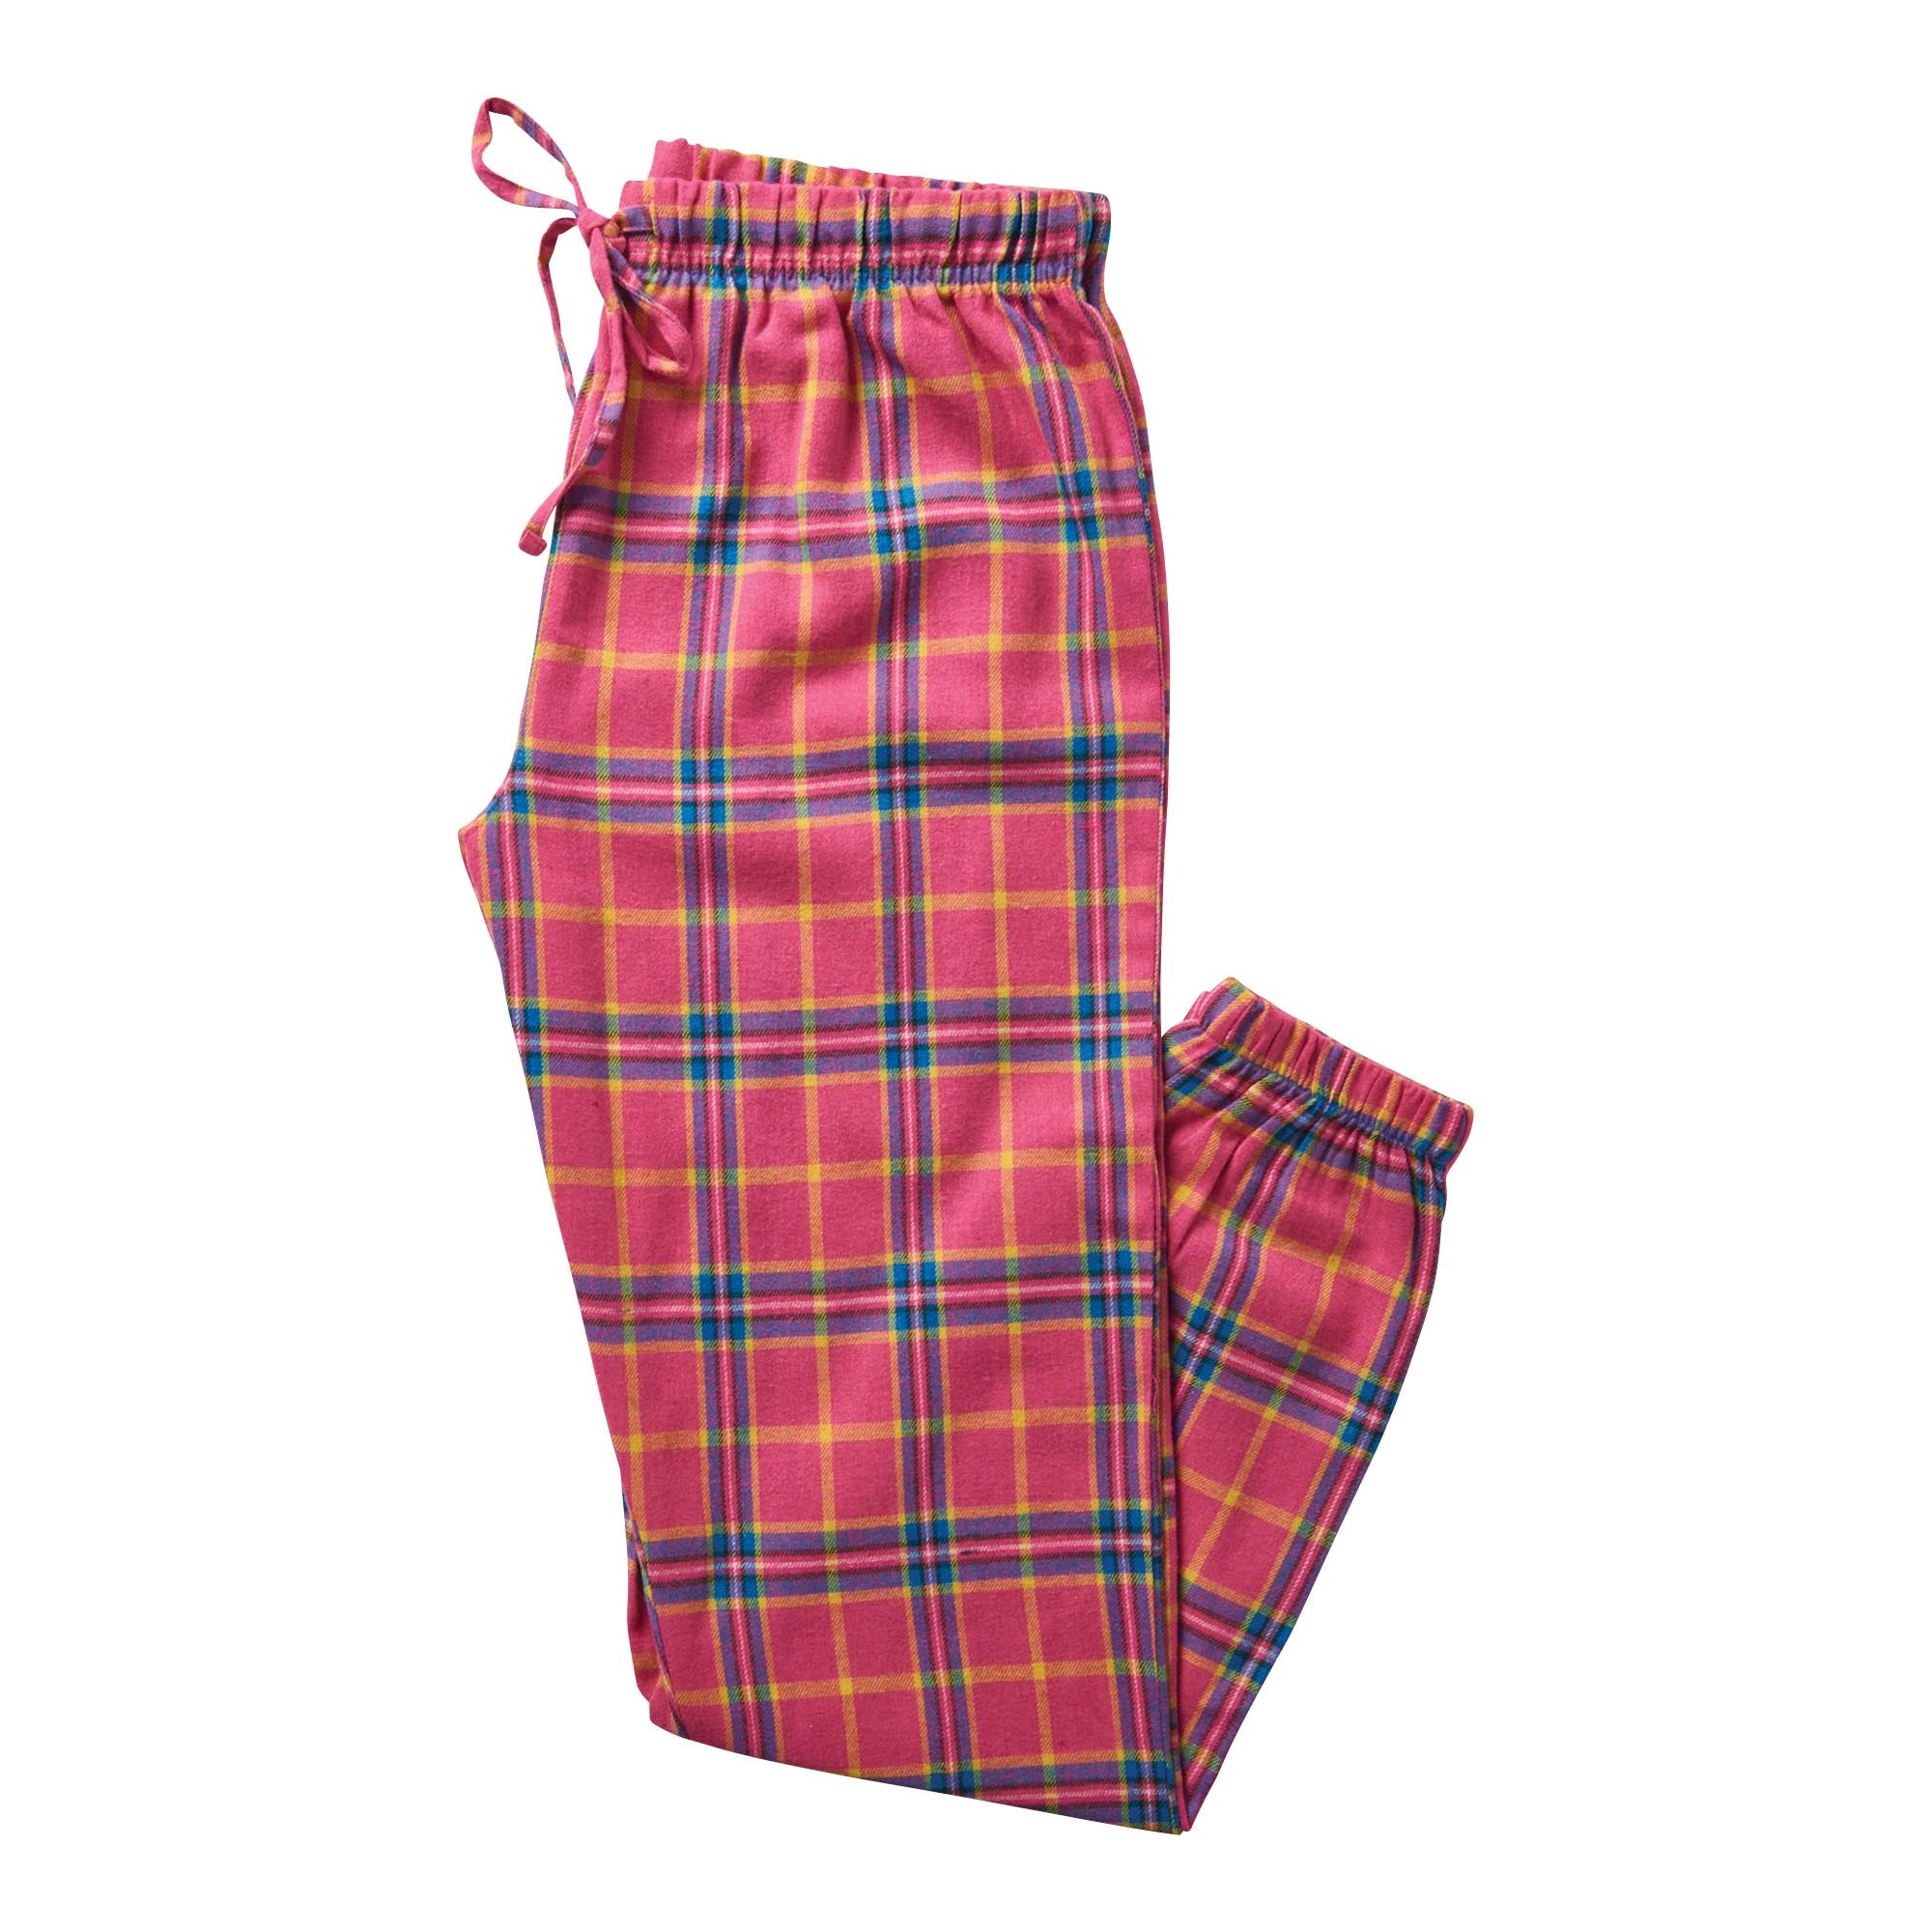 Women's All-Over Plaid Printed Flannel PJ Pants with Drawstring